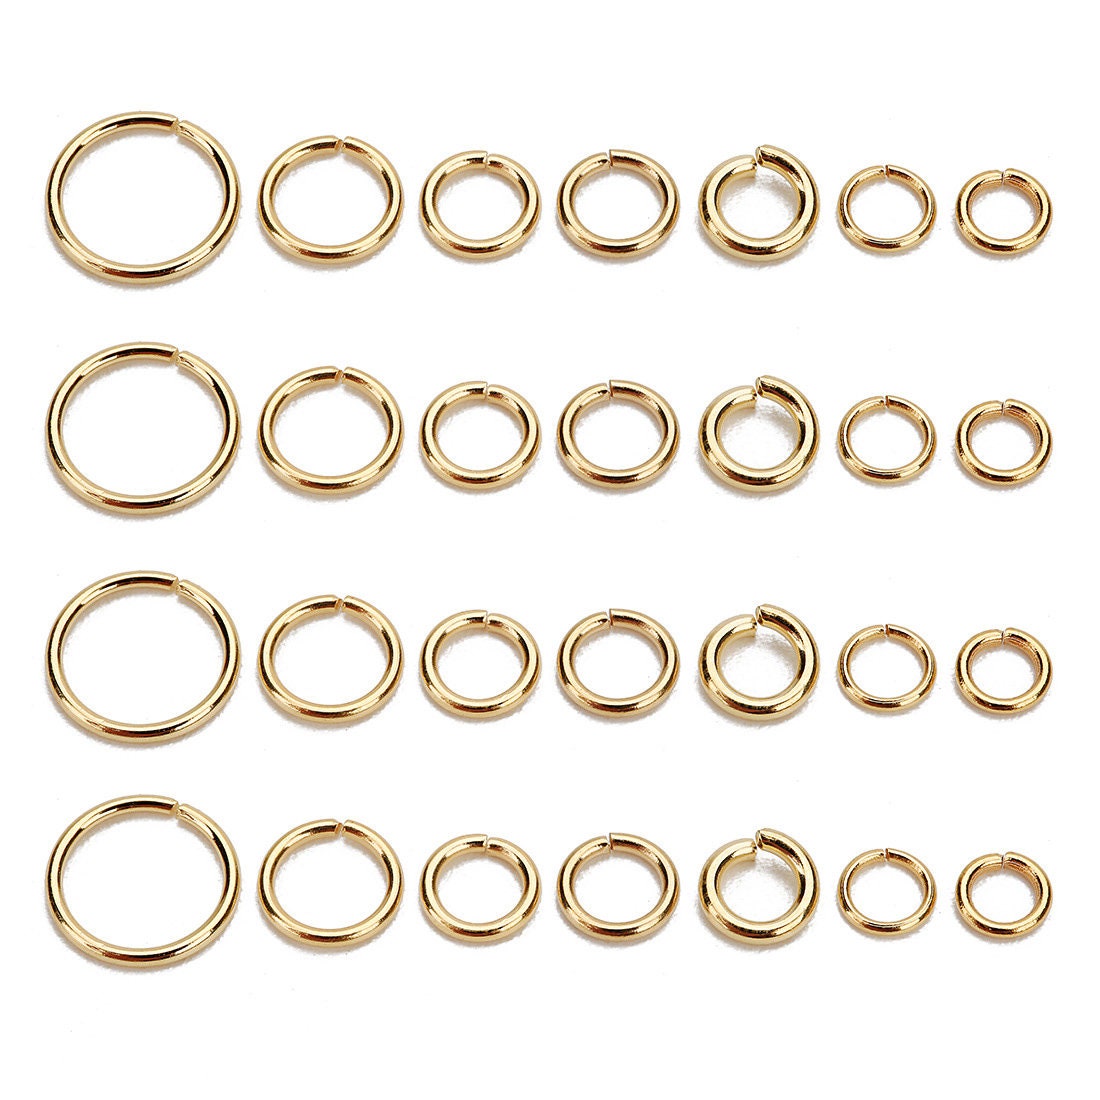 18K gold plated jump ring - 50pcs stainless jumprings - Jewelry making